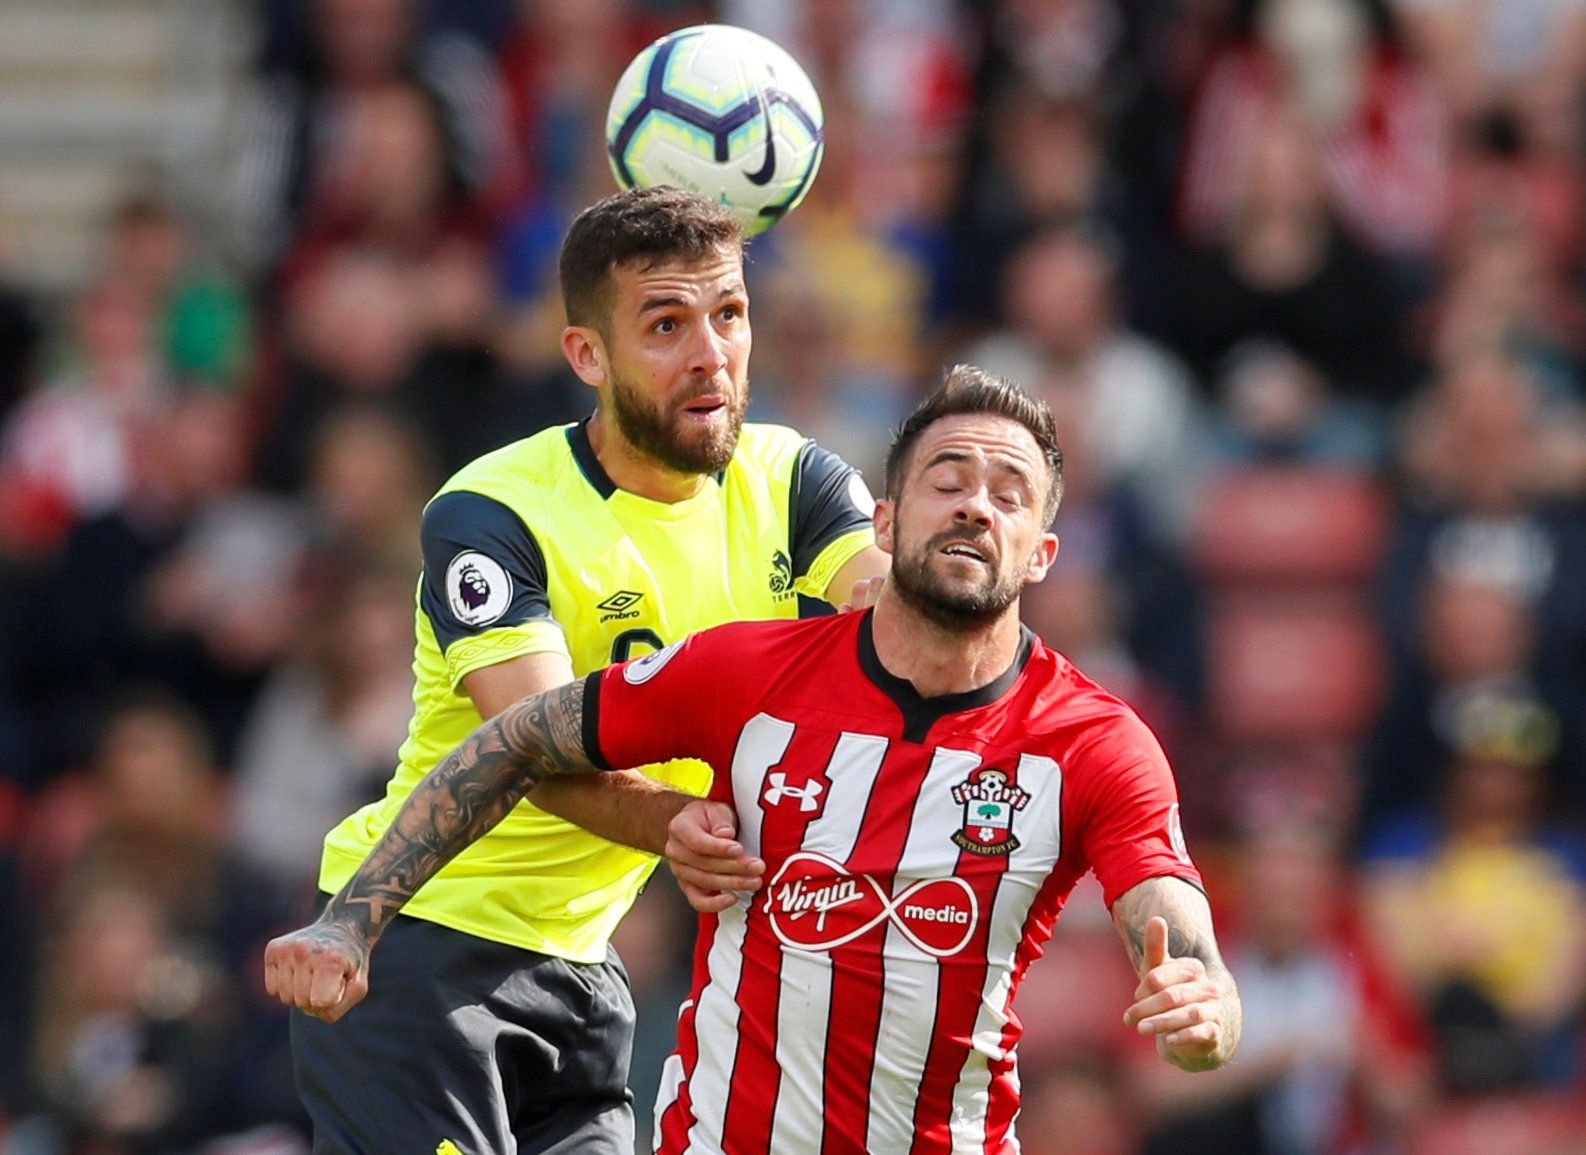 Soccer Football - Premier League - Southampton v Huddersfield Town - St Mary's Stadium, Southampton, Britain - May 12, 2019  Huddersfield Town's Tommy Smith in action with Southampton's Danny Ings   REUTERS/David Klein  EDITORIAL USE ONLY. No use with unauthorized audio, video, data, fixture lists, club/league logos or 